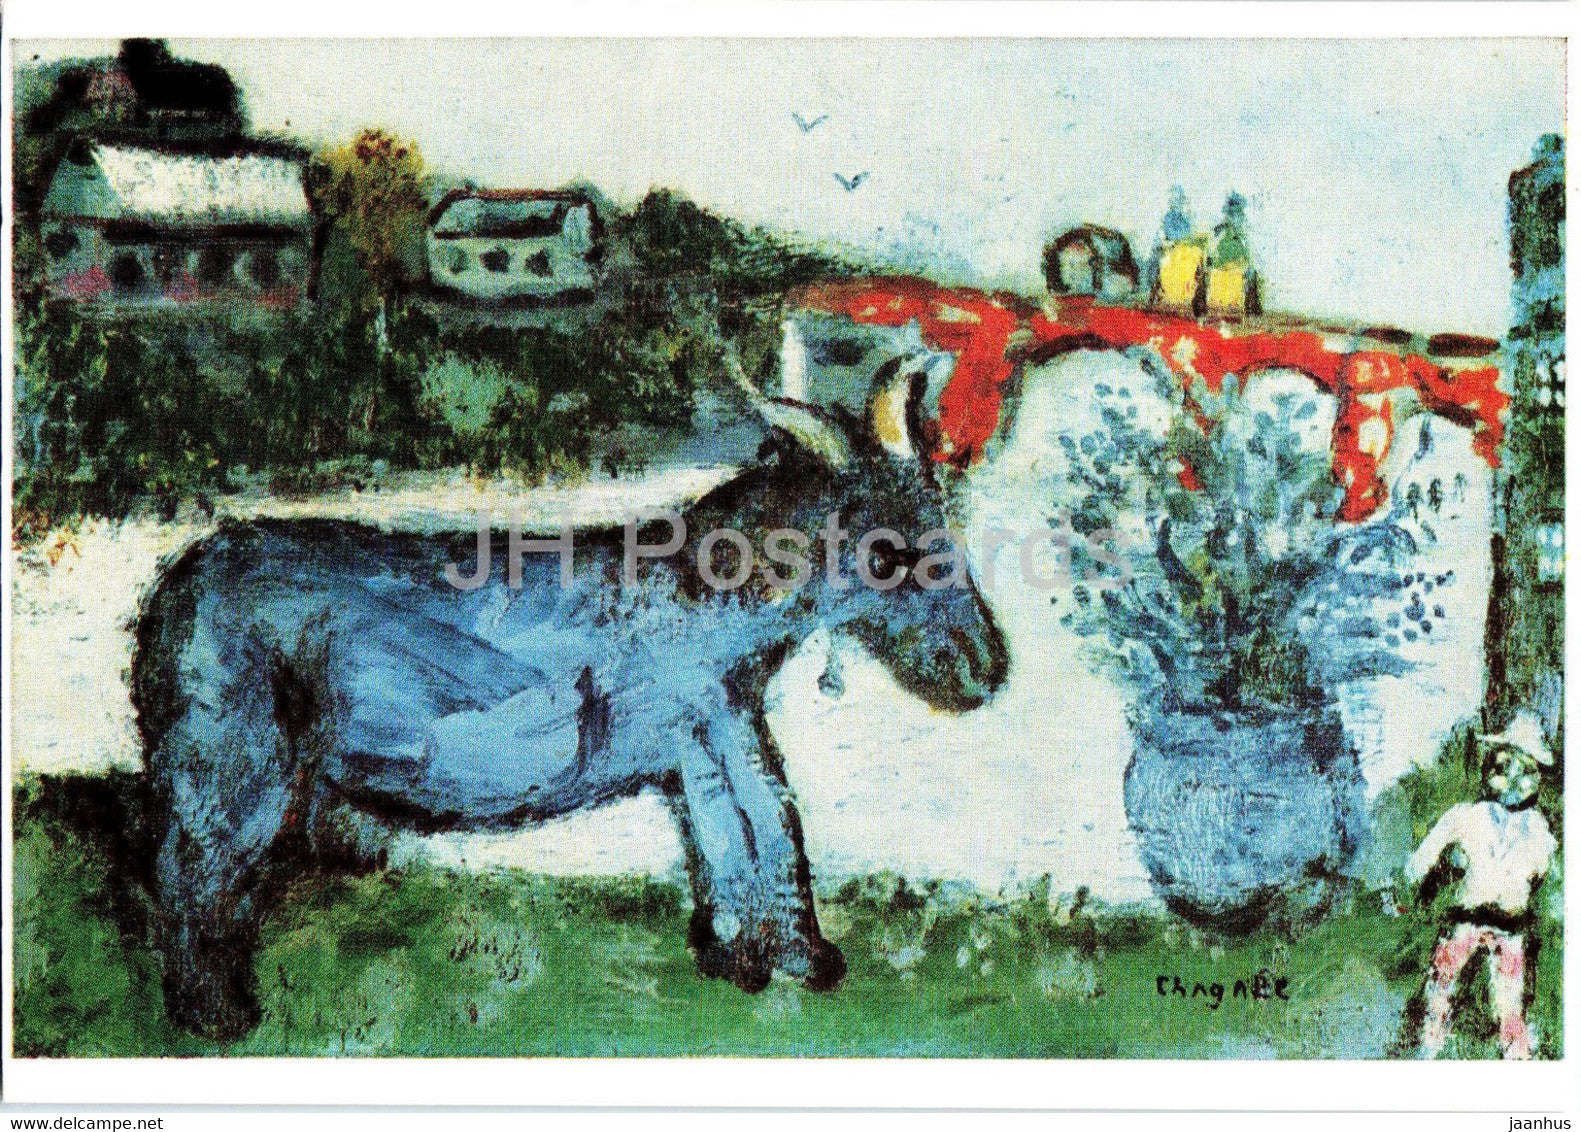 painting by Marc Chagall - Der Blaue Esel - The Blue Donkey - animals - French art - Germany - unused - JH Postcards